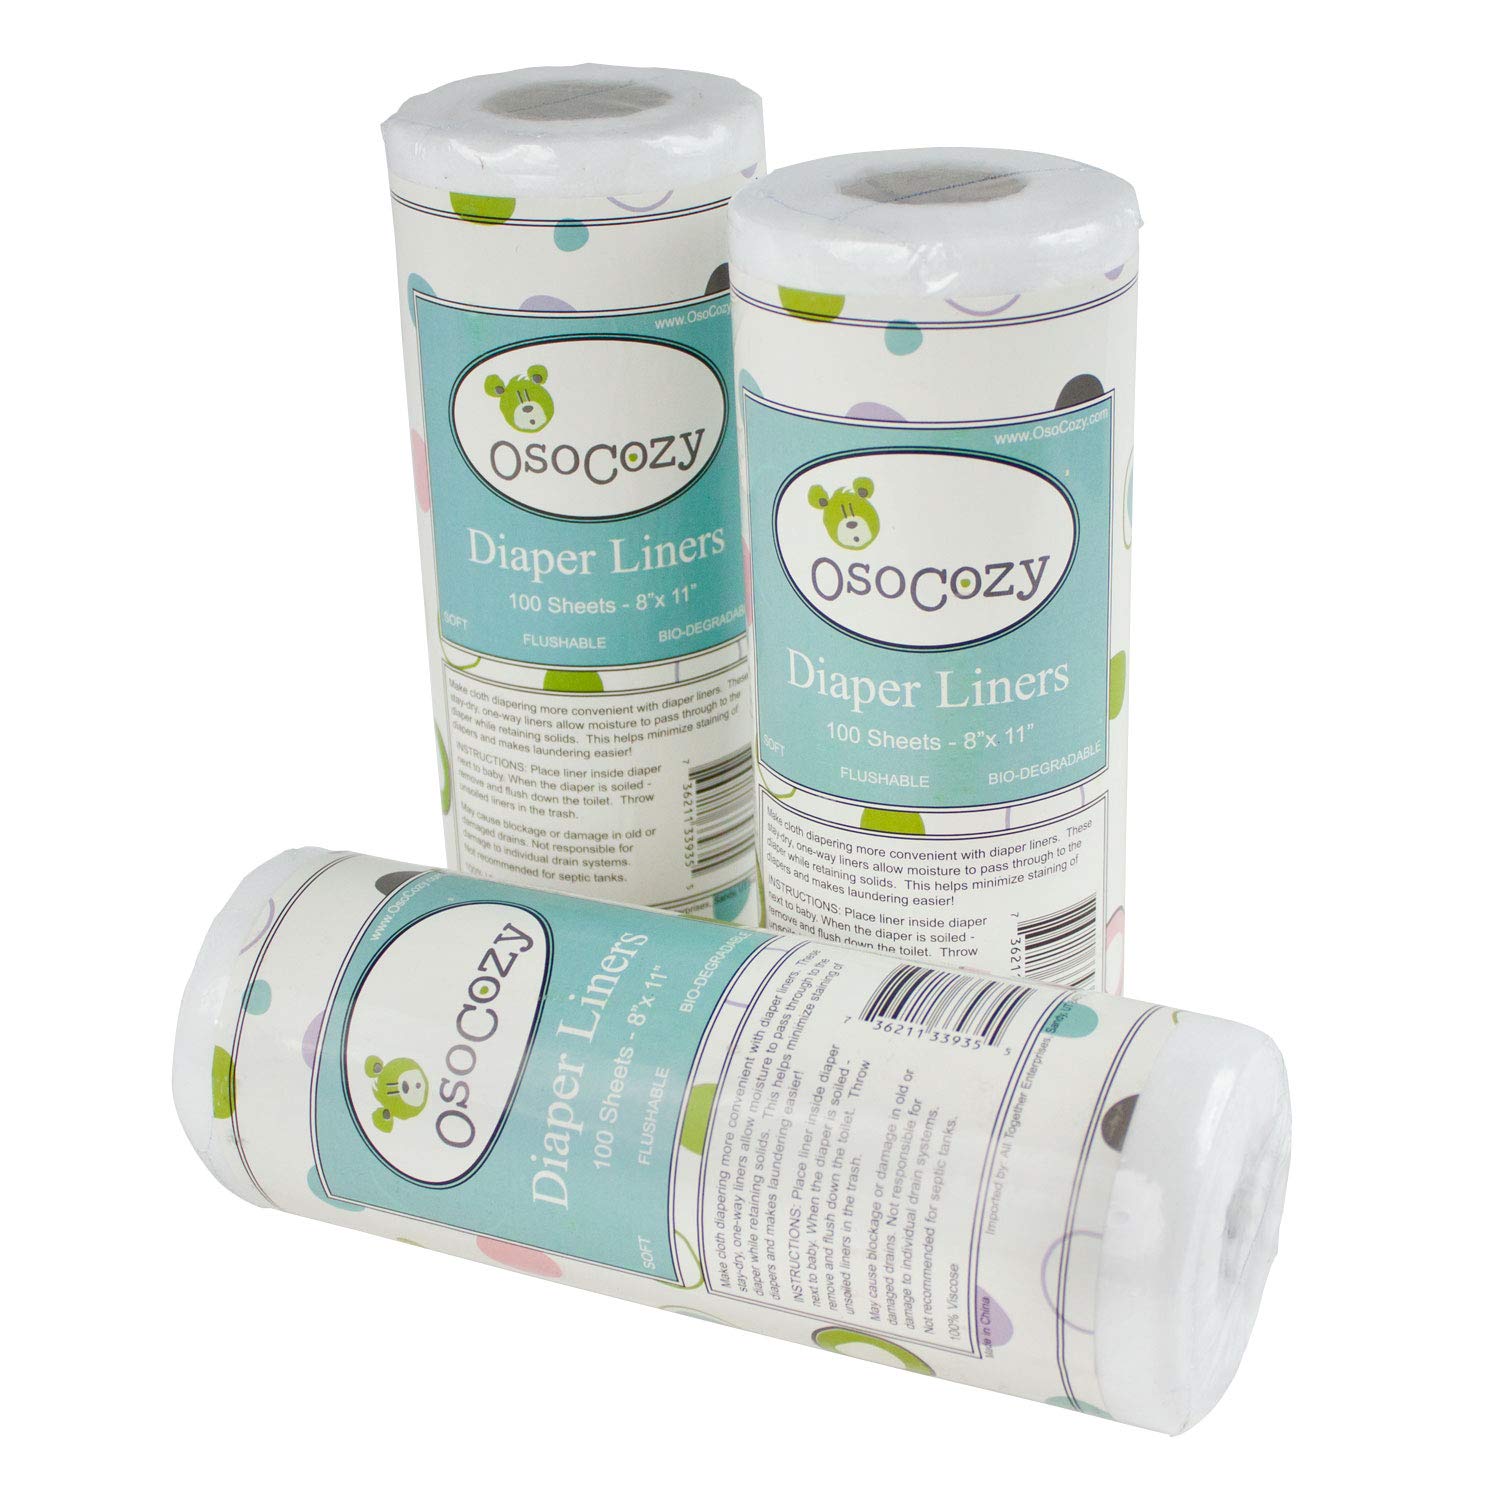 OsoCozy Flushable Diaper Liners 3 Pack - Make Cloth Diapering Convenient with Easy, Quick, Cloth Diaper Liners - Super Soft and Gentle on Baby’s Skin - 100 Sheets per roll - 3 Rolls per Package.